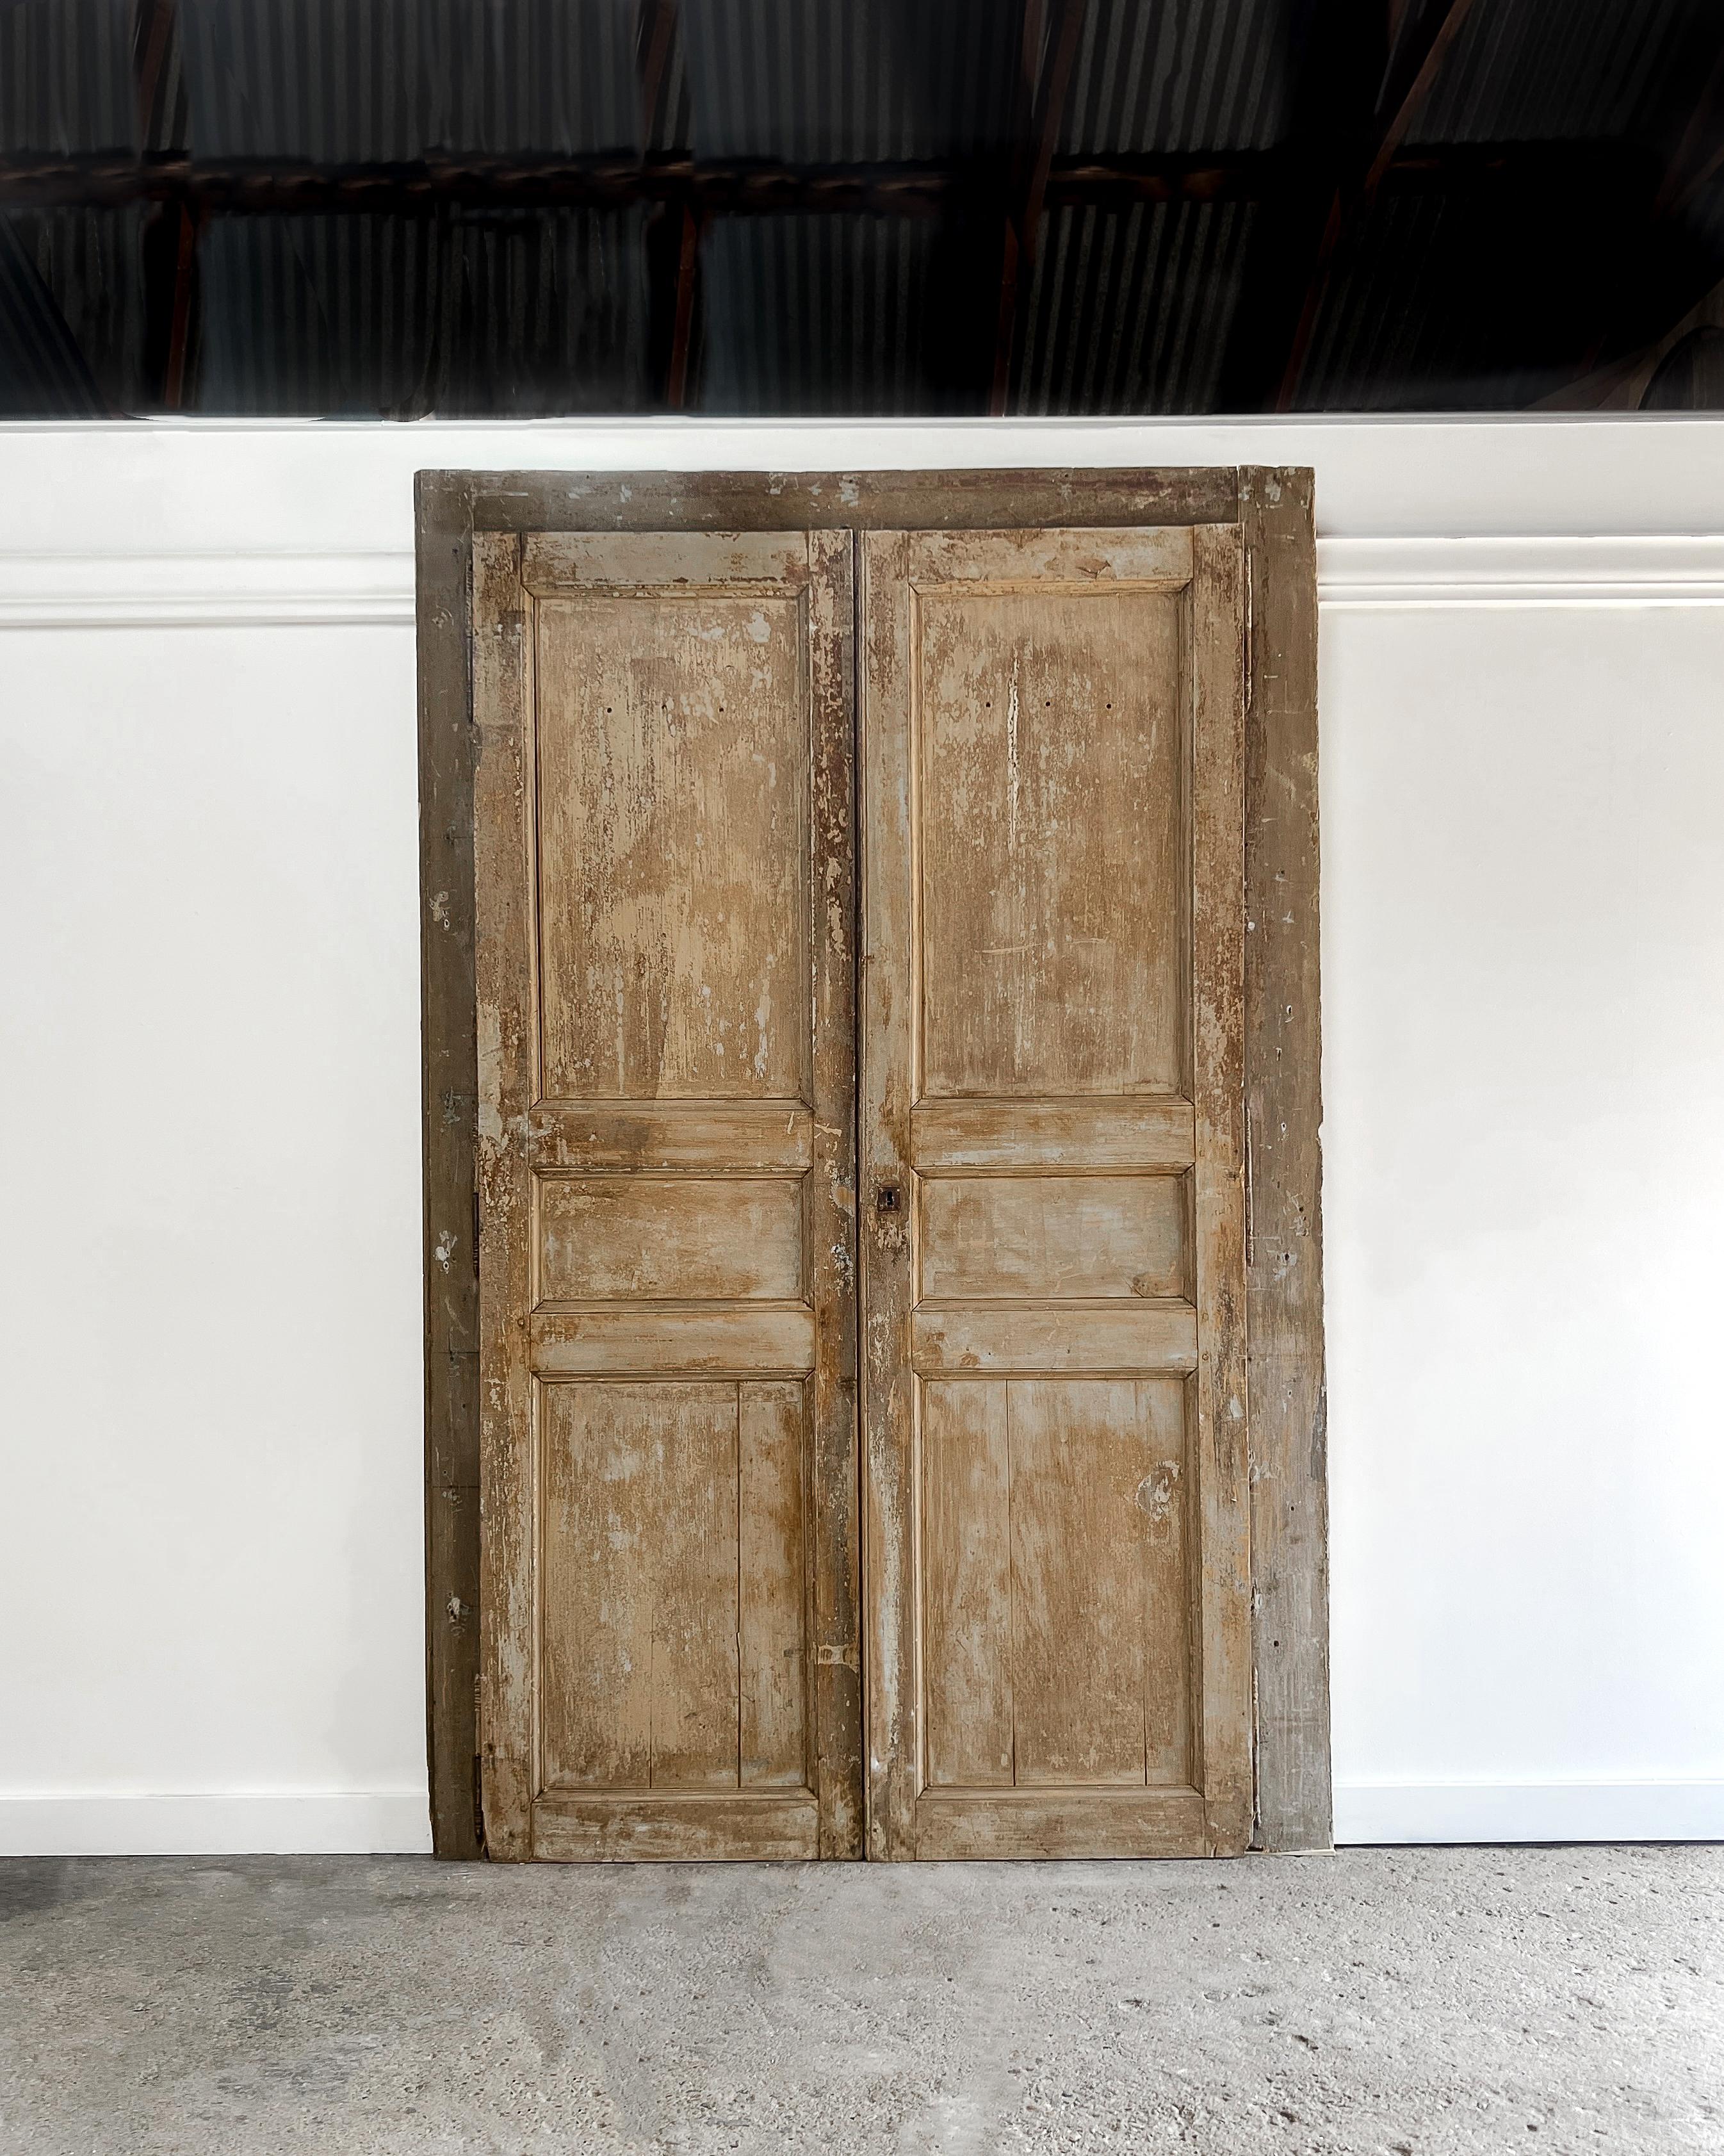 Reclaimed pair of 3-panel configuration French doors with beveled trim detailing. These doors tell a story through layers of earth-tone paint colors, radiating warmth and evoking an irresistible old-world charm. Accompanied by their original